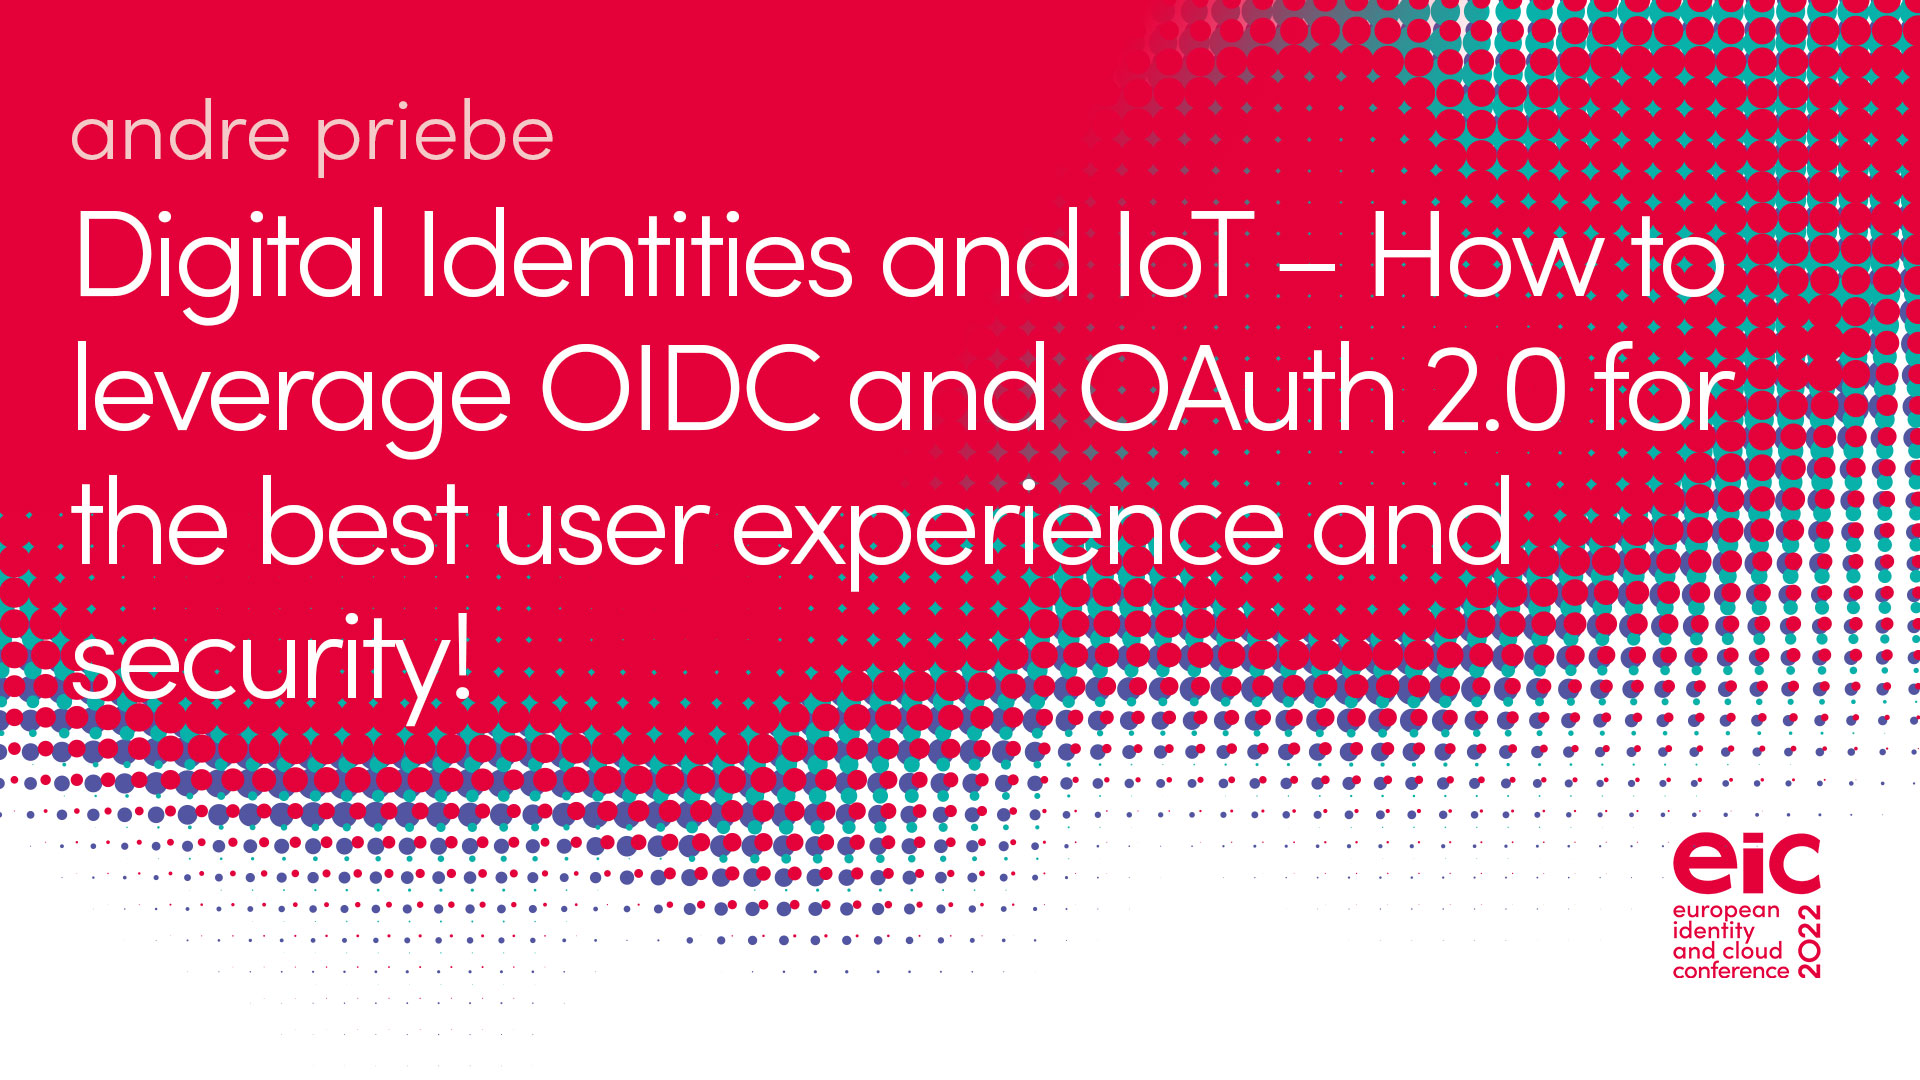 Digital Identities and IoT – How to leverage OIDC and OAuth 2.0 for the best user experience and security!